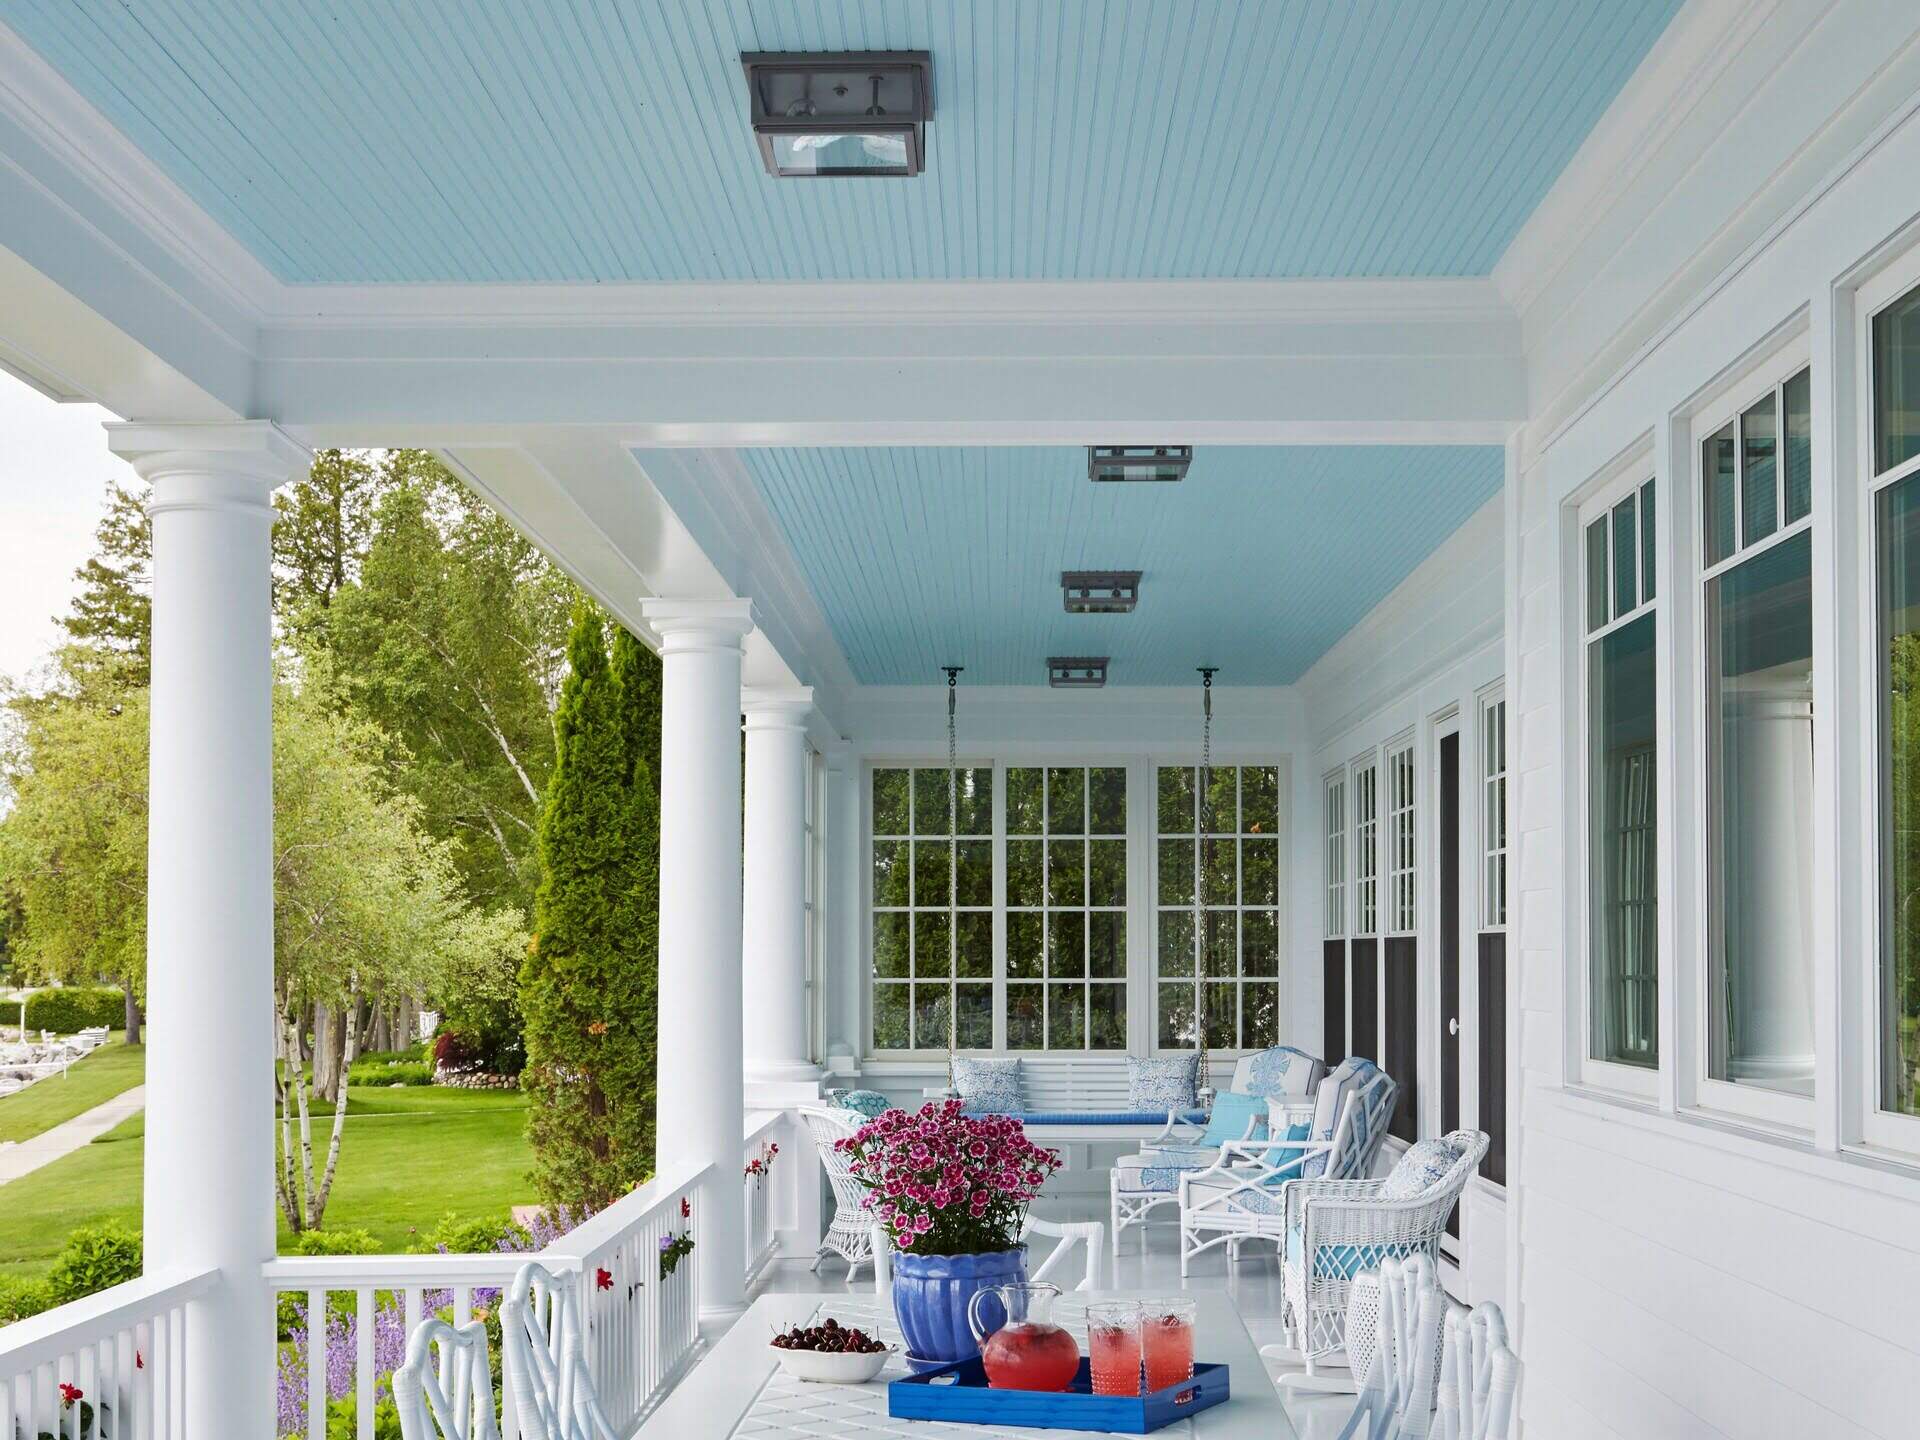 Why Do You Paint The Porch Ceiling Blue